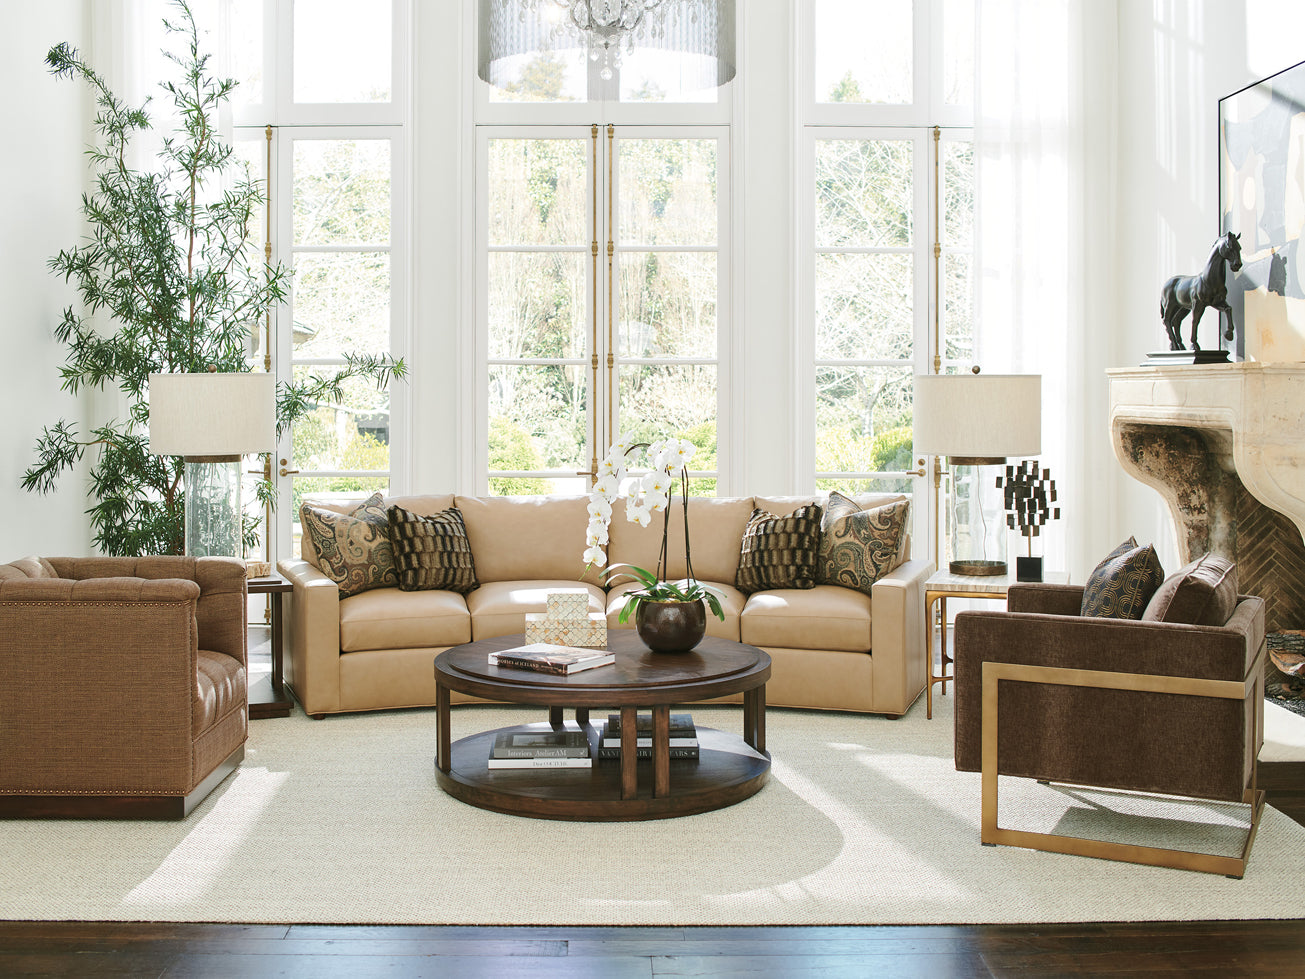 Living room scene from Lexington Furniture's Silverado collection featuring a large curved sectional sofa and a round cocktail table.